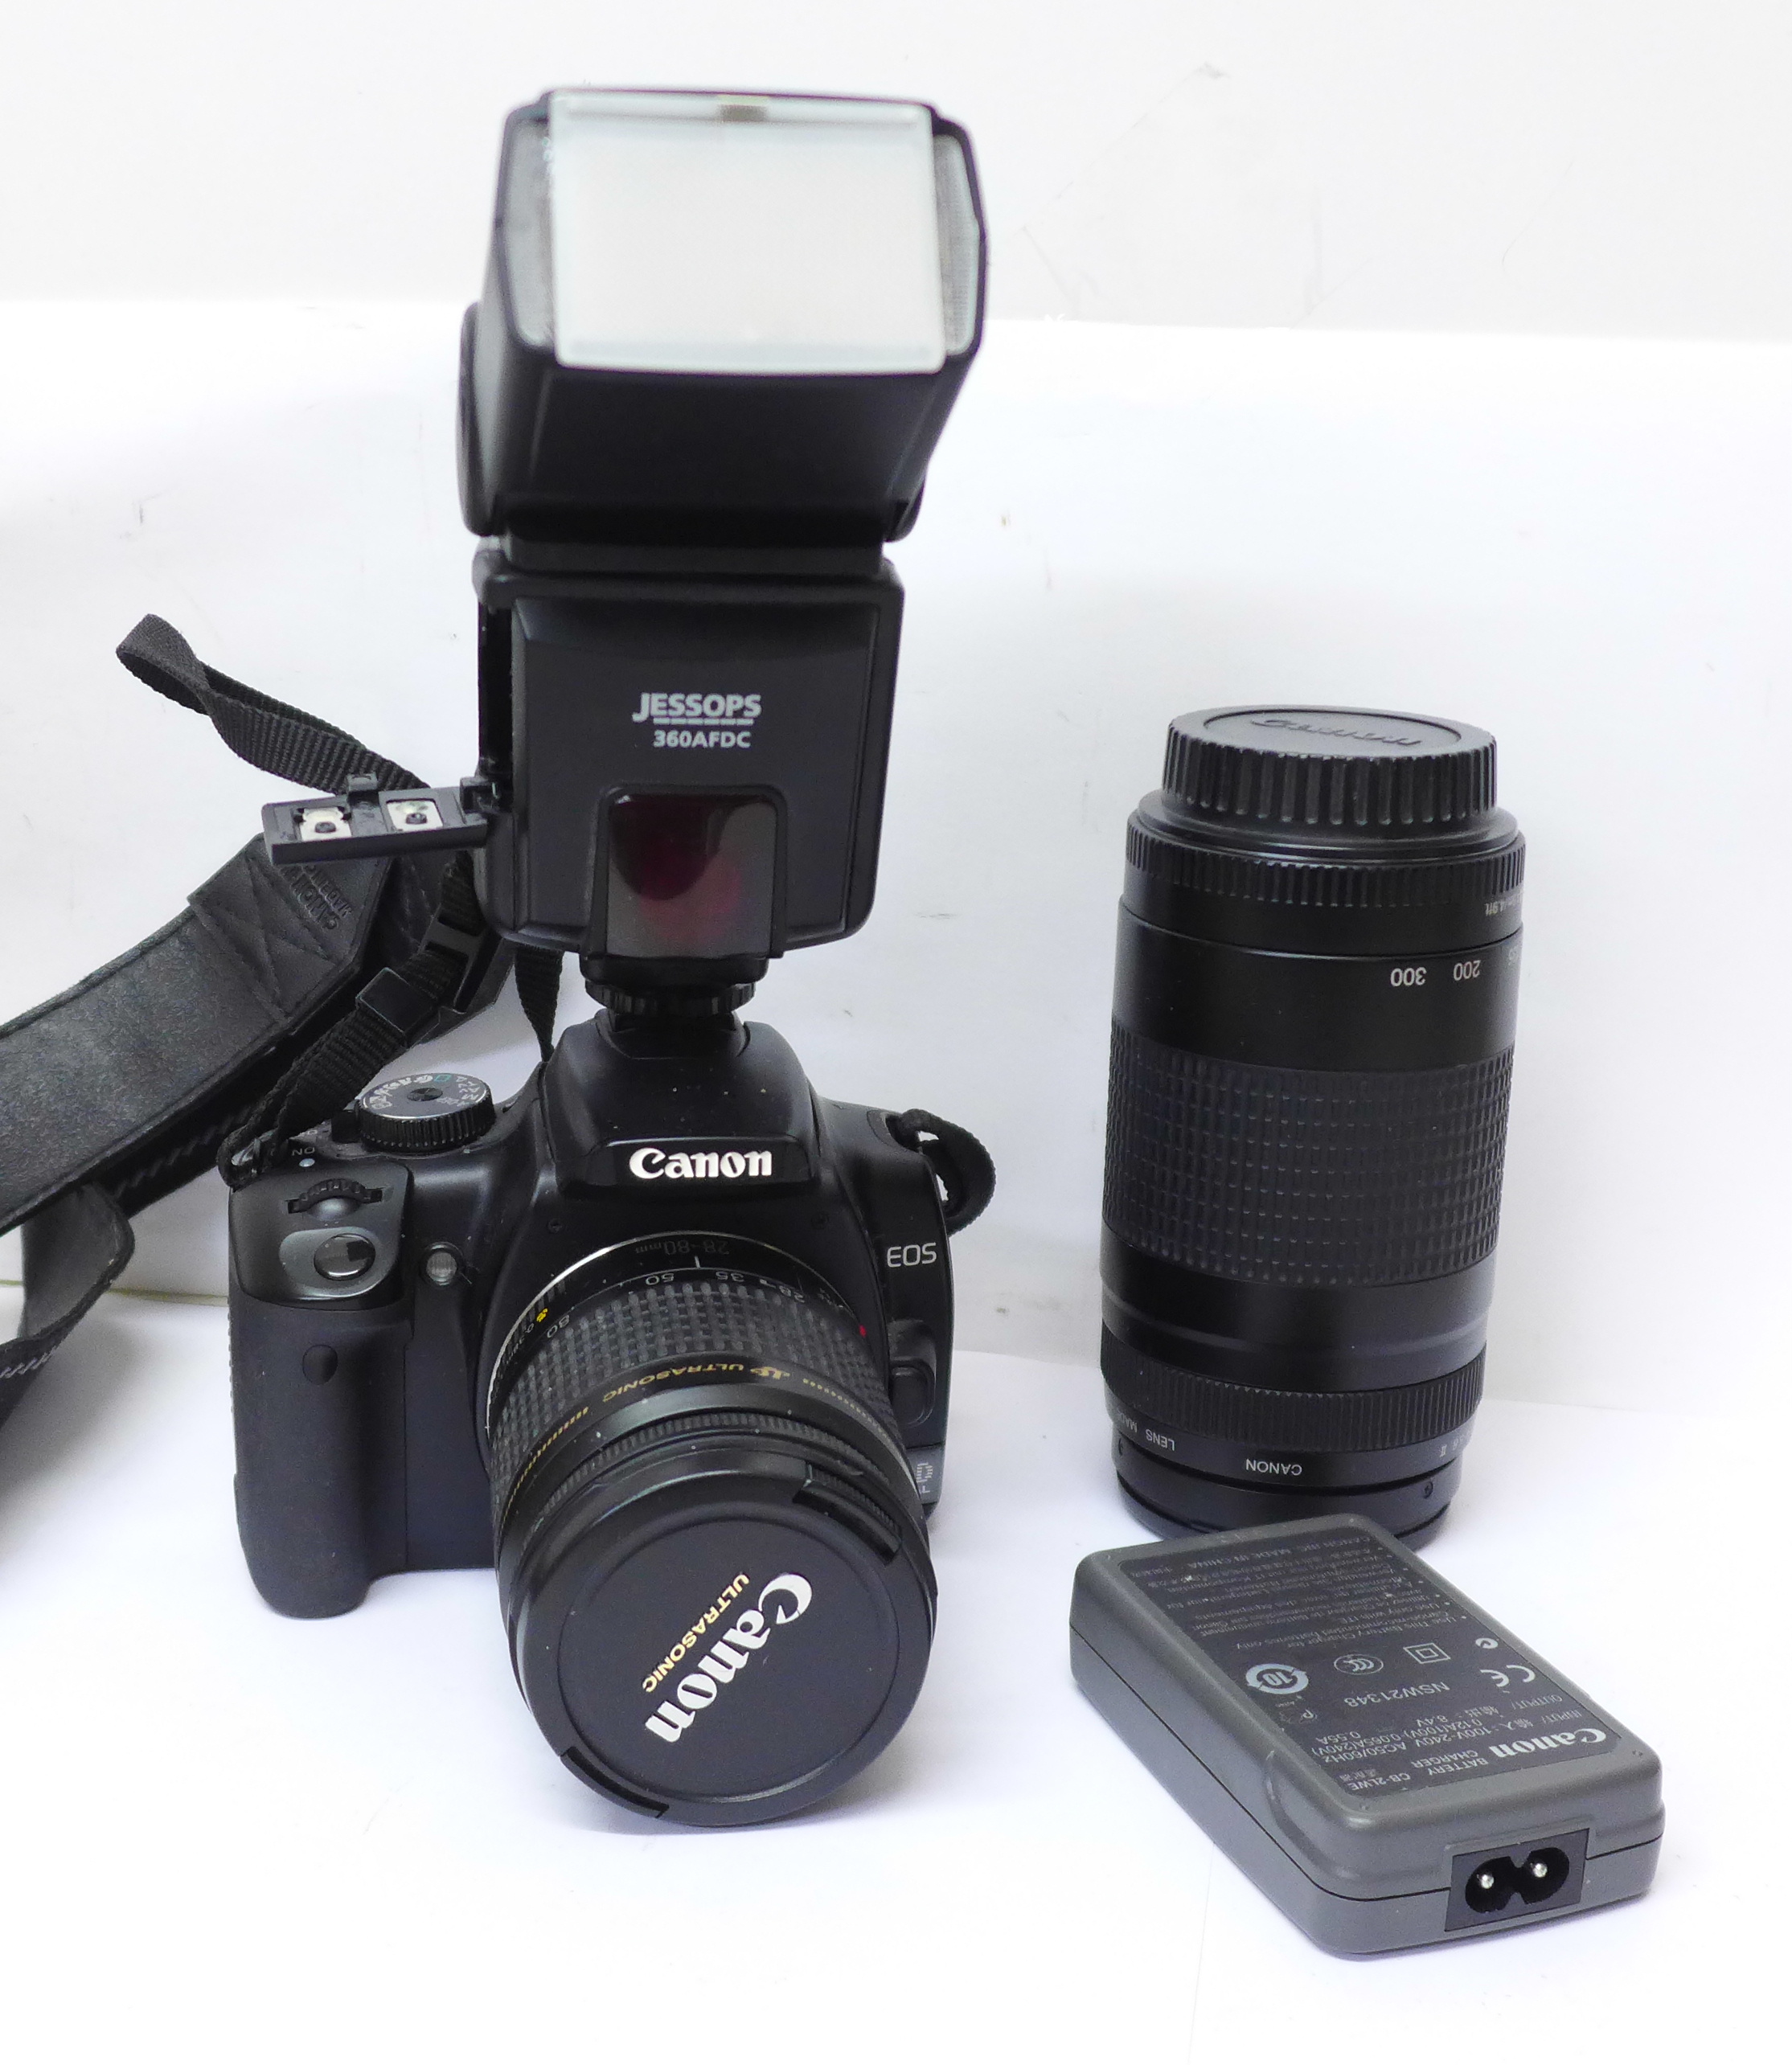 A Canon EOS 400D camera, a Canon 75-300mm f4.0-5.6 II and Canon 28-80mm f3.5-5.6 III Ultrasonic zoom